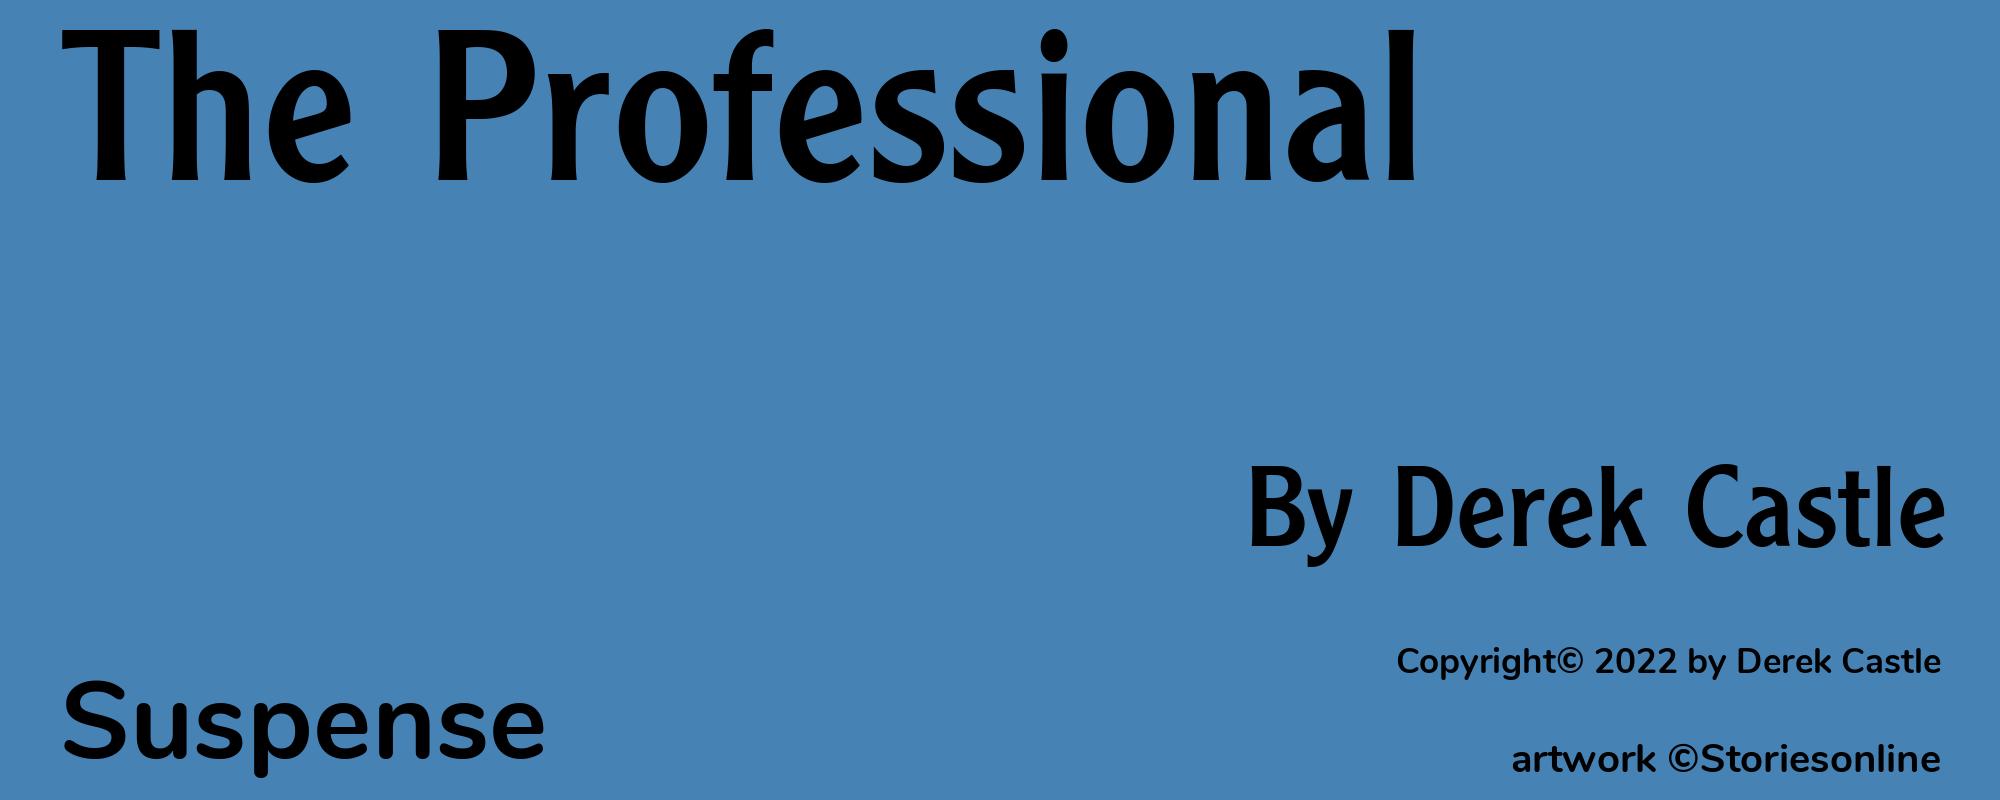 The Professional - Cover